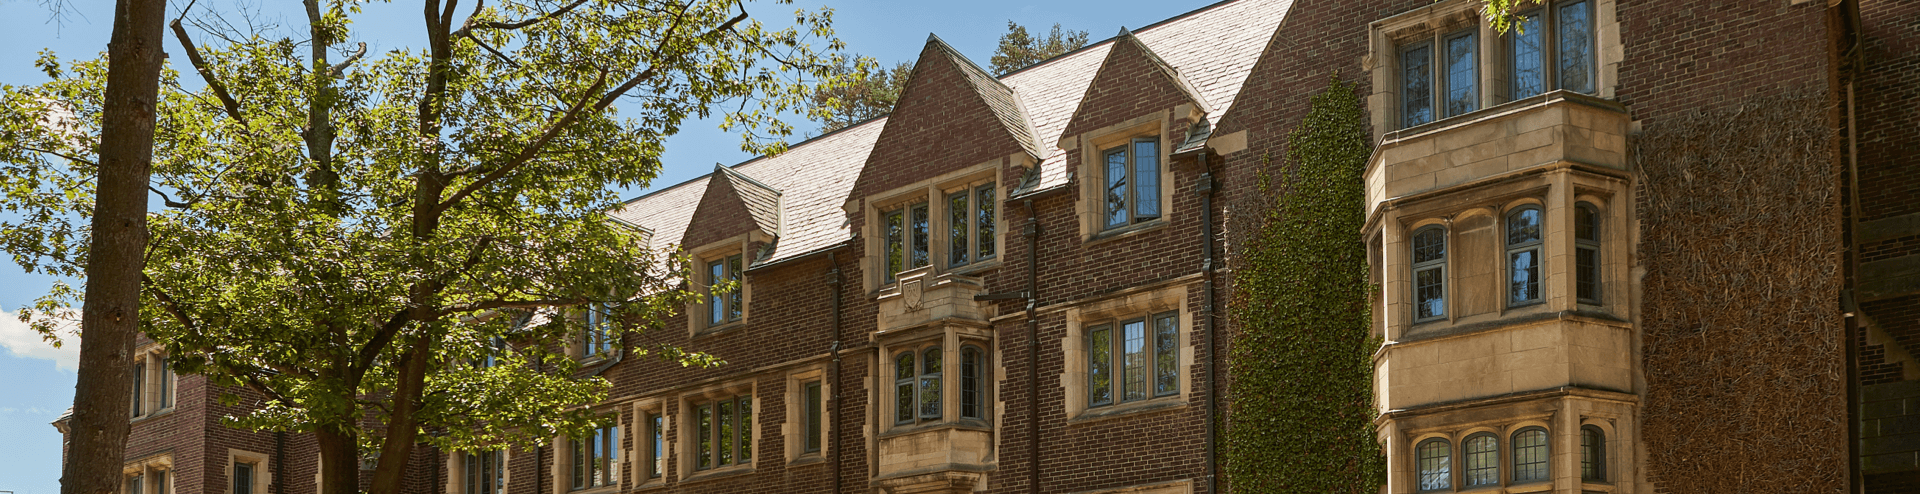 Gothic-style campus buildings